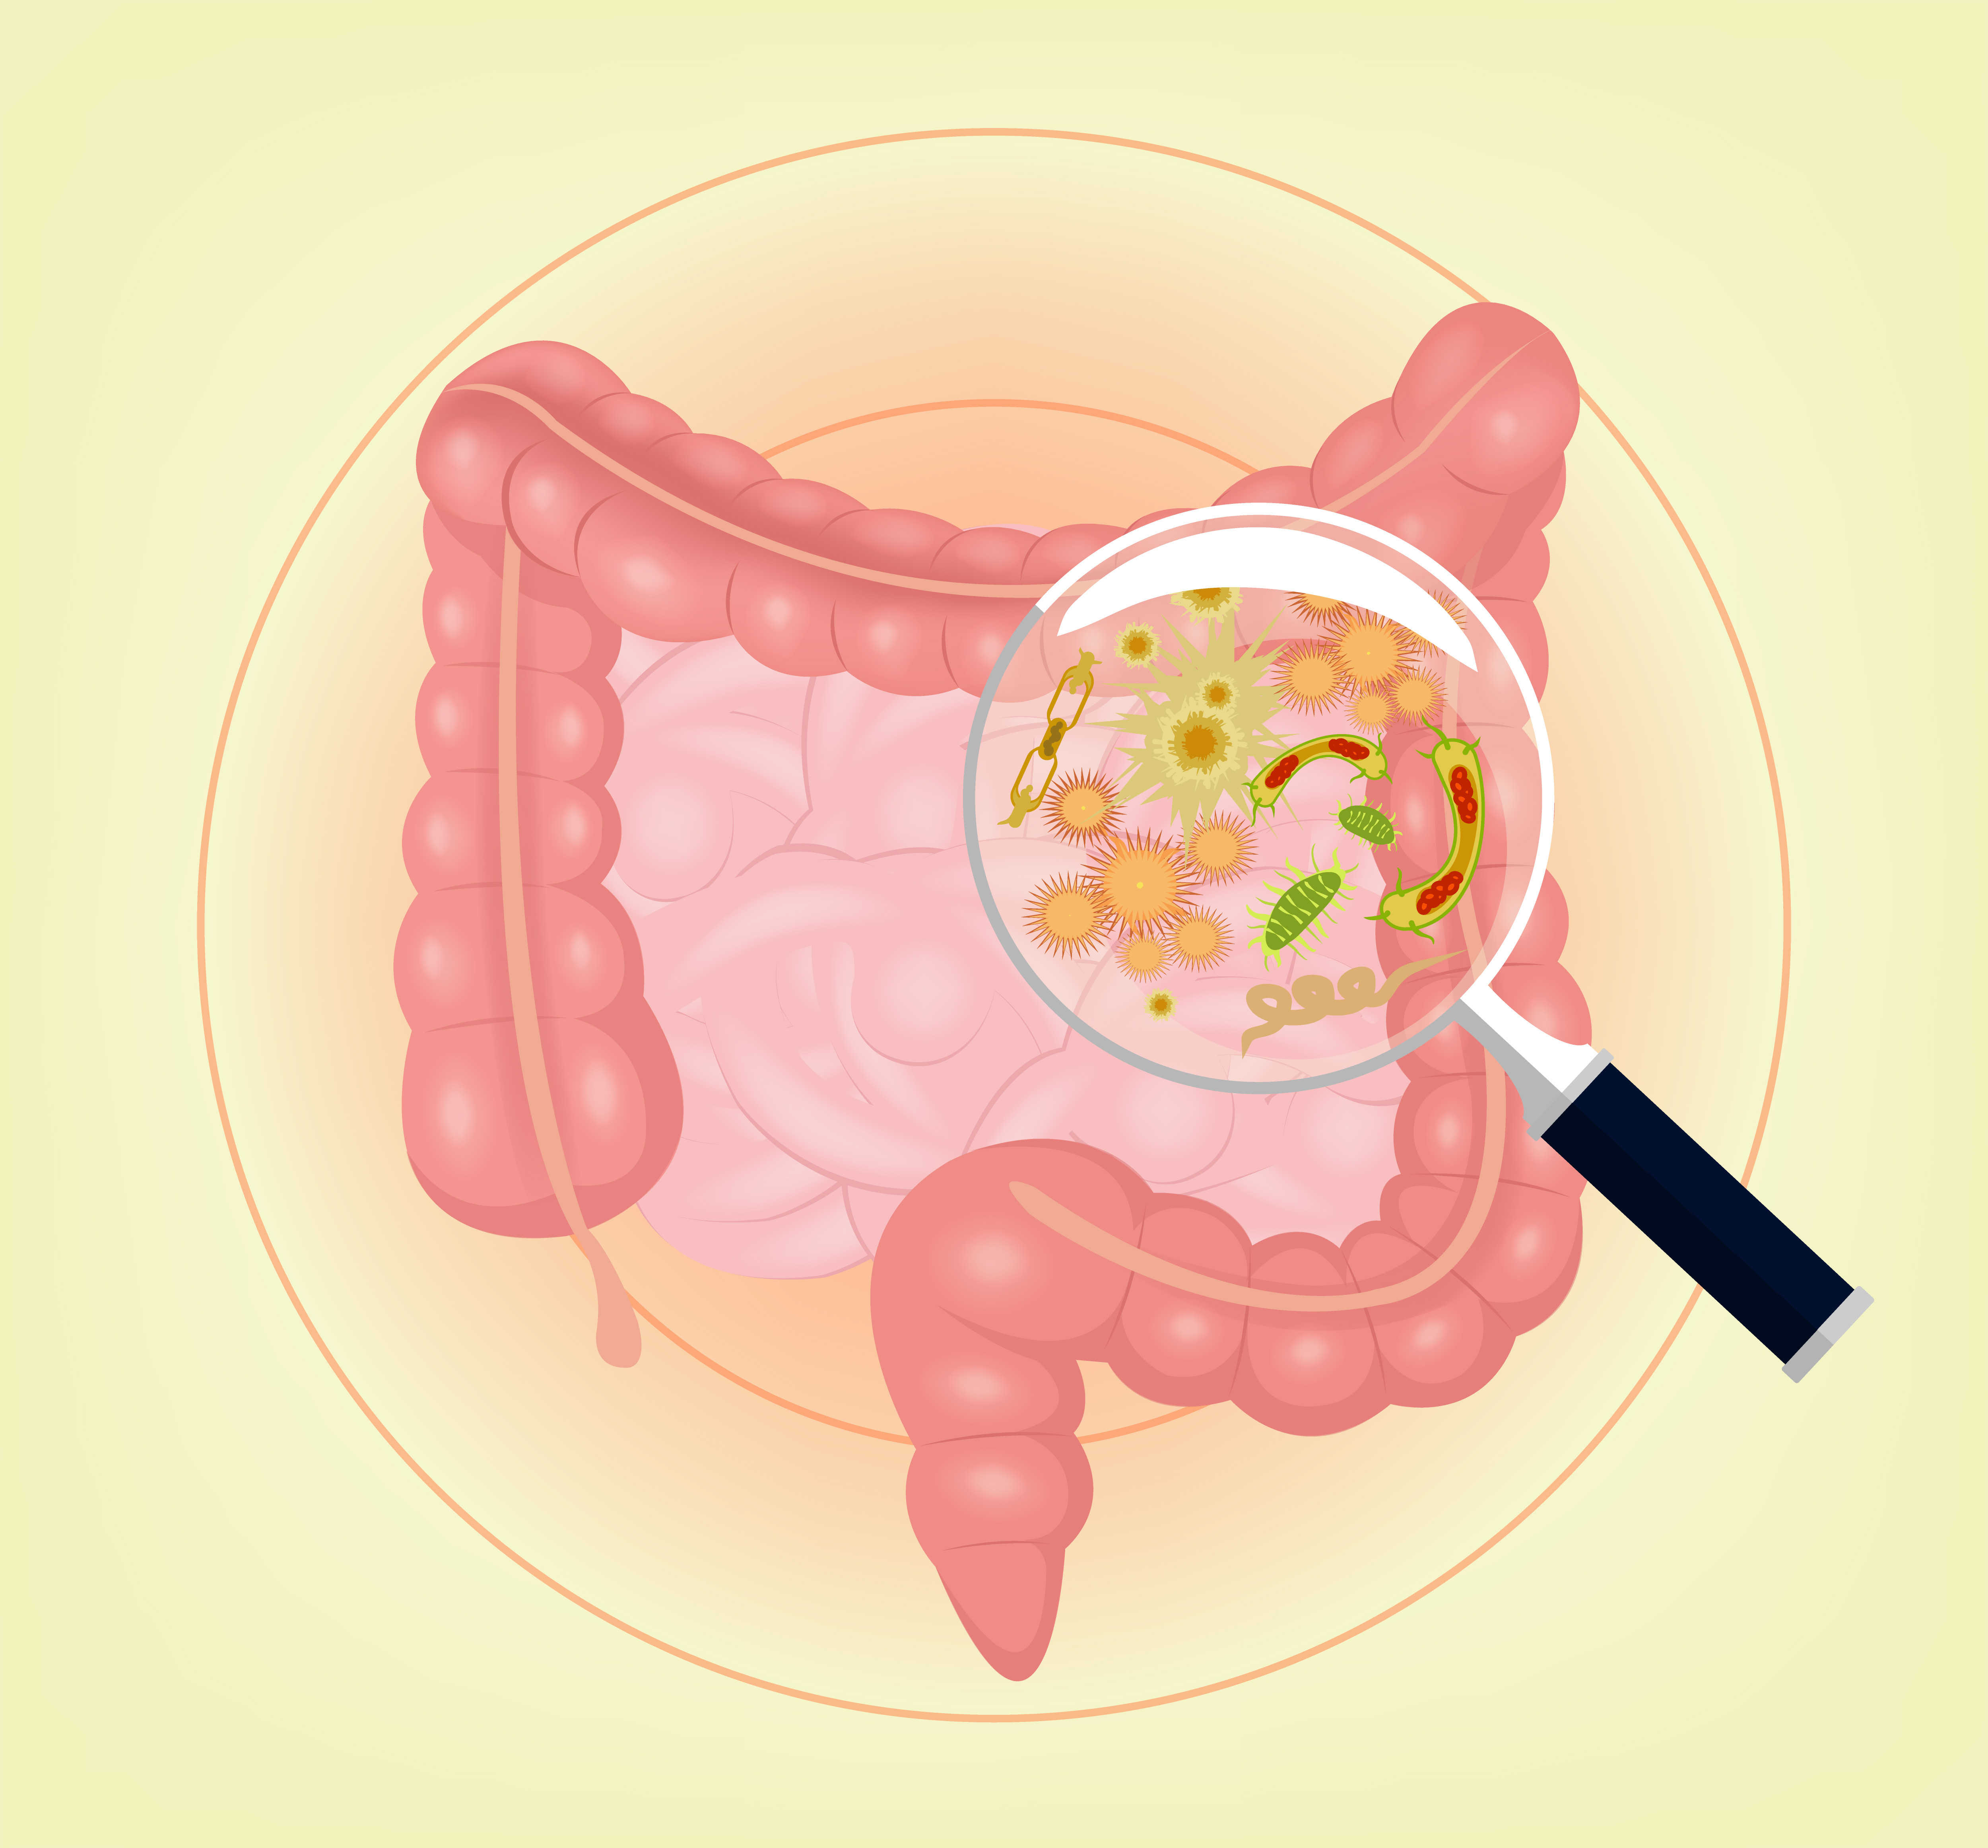 AANAM — Gut Bacteria May Play Role in Pediatric MS, Studies Suggest